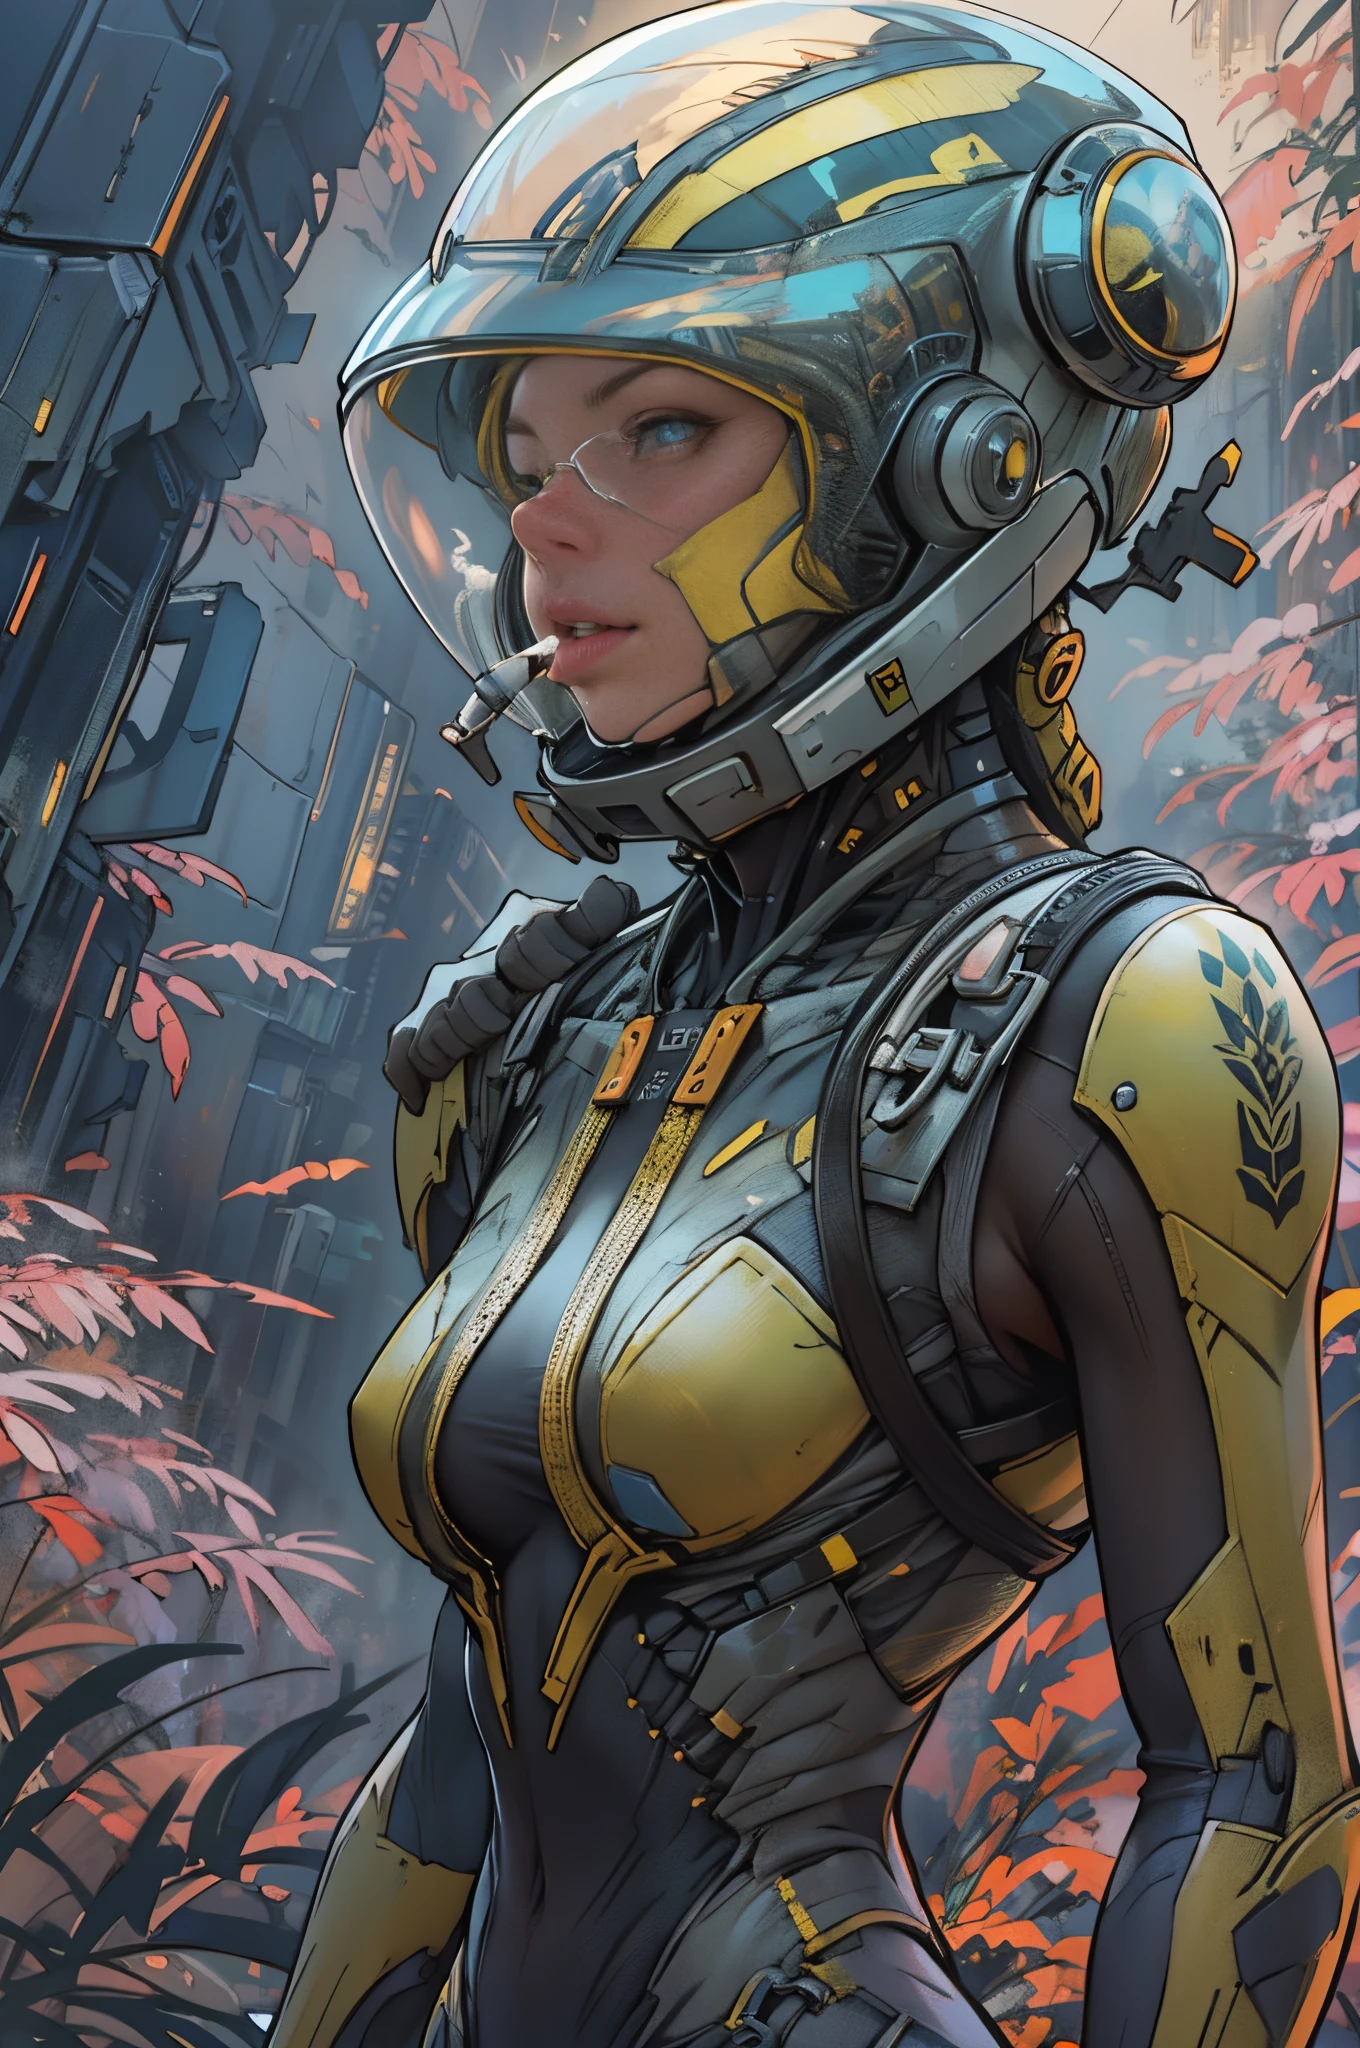 Award-winning close-up photos of women (Sci-fi explorer:1.3) Wear a helmet with a hexagonal glass visor, [Style-Psycho::10], next to one (Crashed vehicle:1.2), (smokes:1.4), Gaze upon a verdant alien planet, (mont:1.2) (tall grass:1.2), Rochas, The is very detailed, finedetail, (iintricate:1.3), (lens flare glow:0.6), (The light from the back window is backlighted:0.8), (full bloom:0.8), shallowdepthoffield，fully body photo，graceful stance，Detailed face, Detailed eyes，（correct hand：1.5），（Complete and beautiful five fingers：1.5），（Anatomically correct limbs：1.5），（Correct anatomy：1.5），（correct perspective：1.5）， (greg rutkovsky:0.8)，